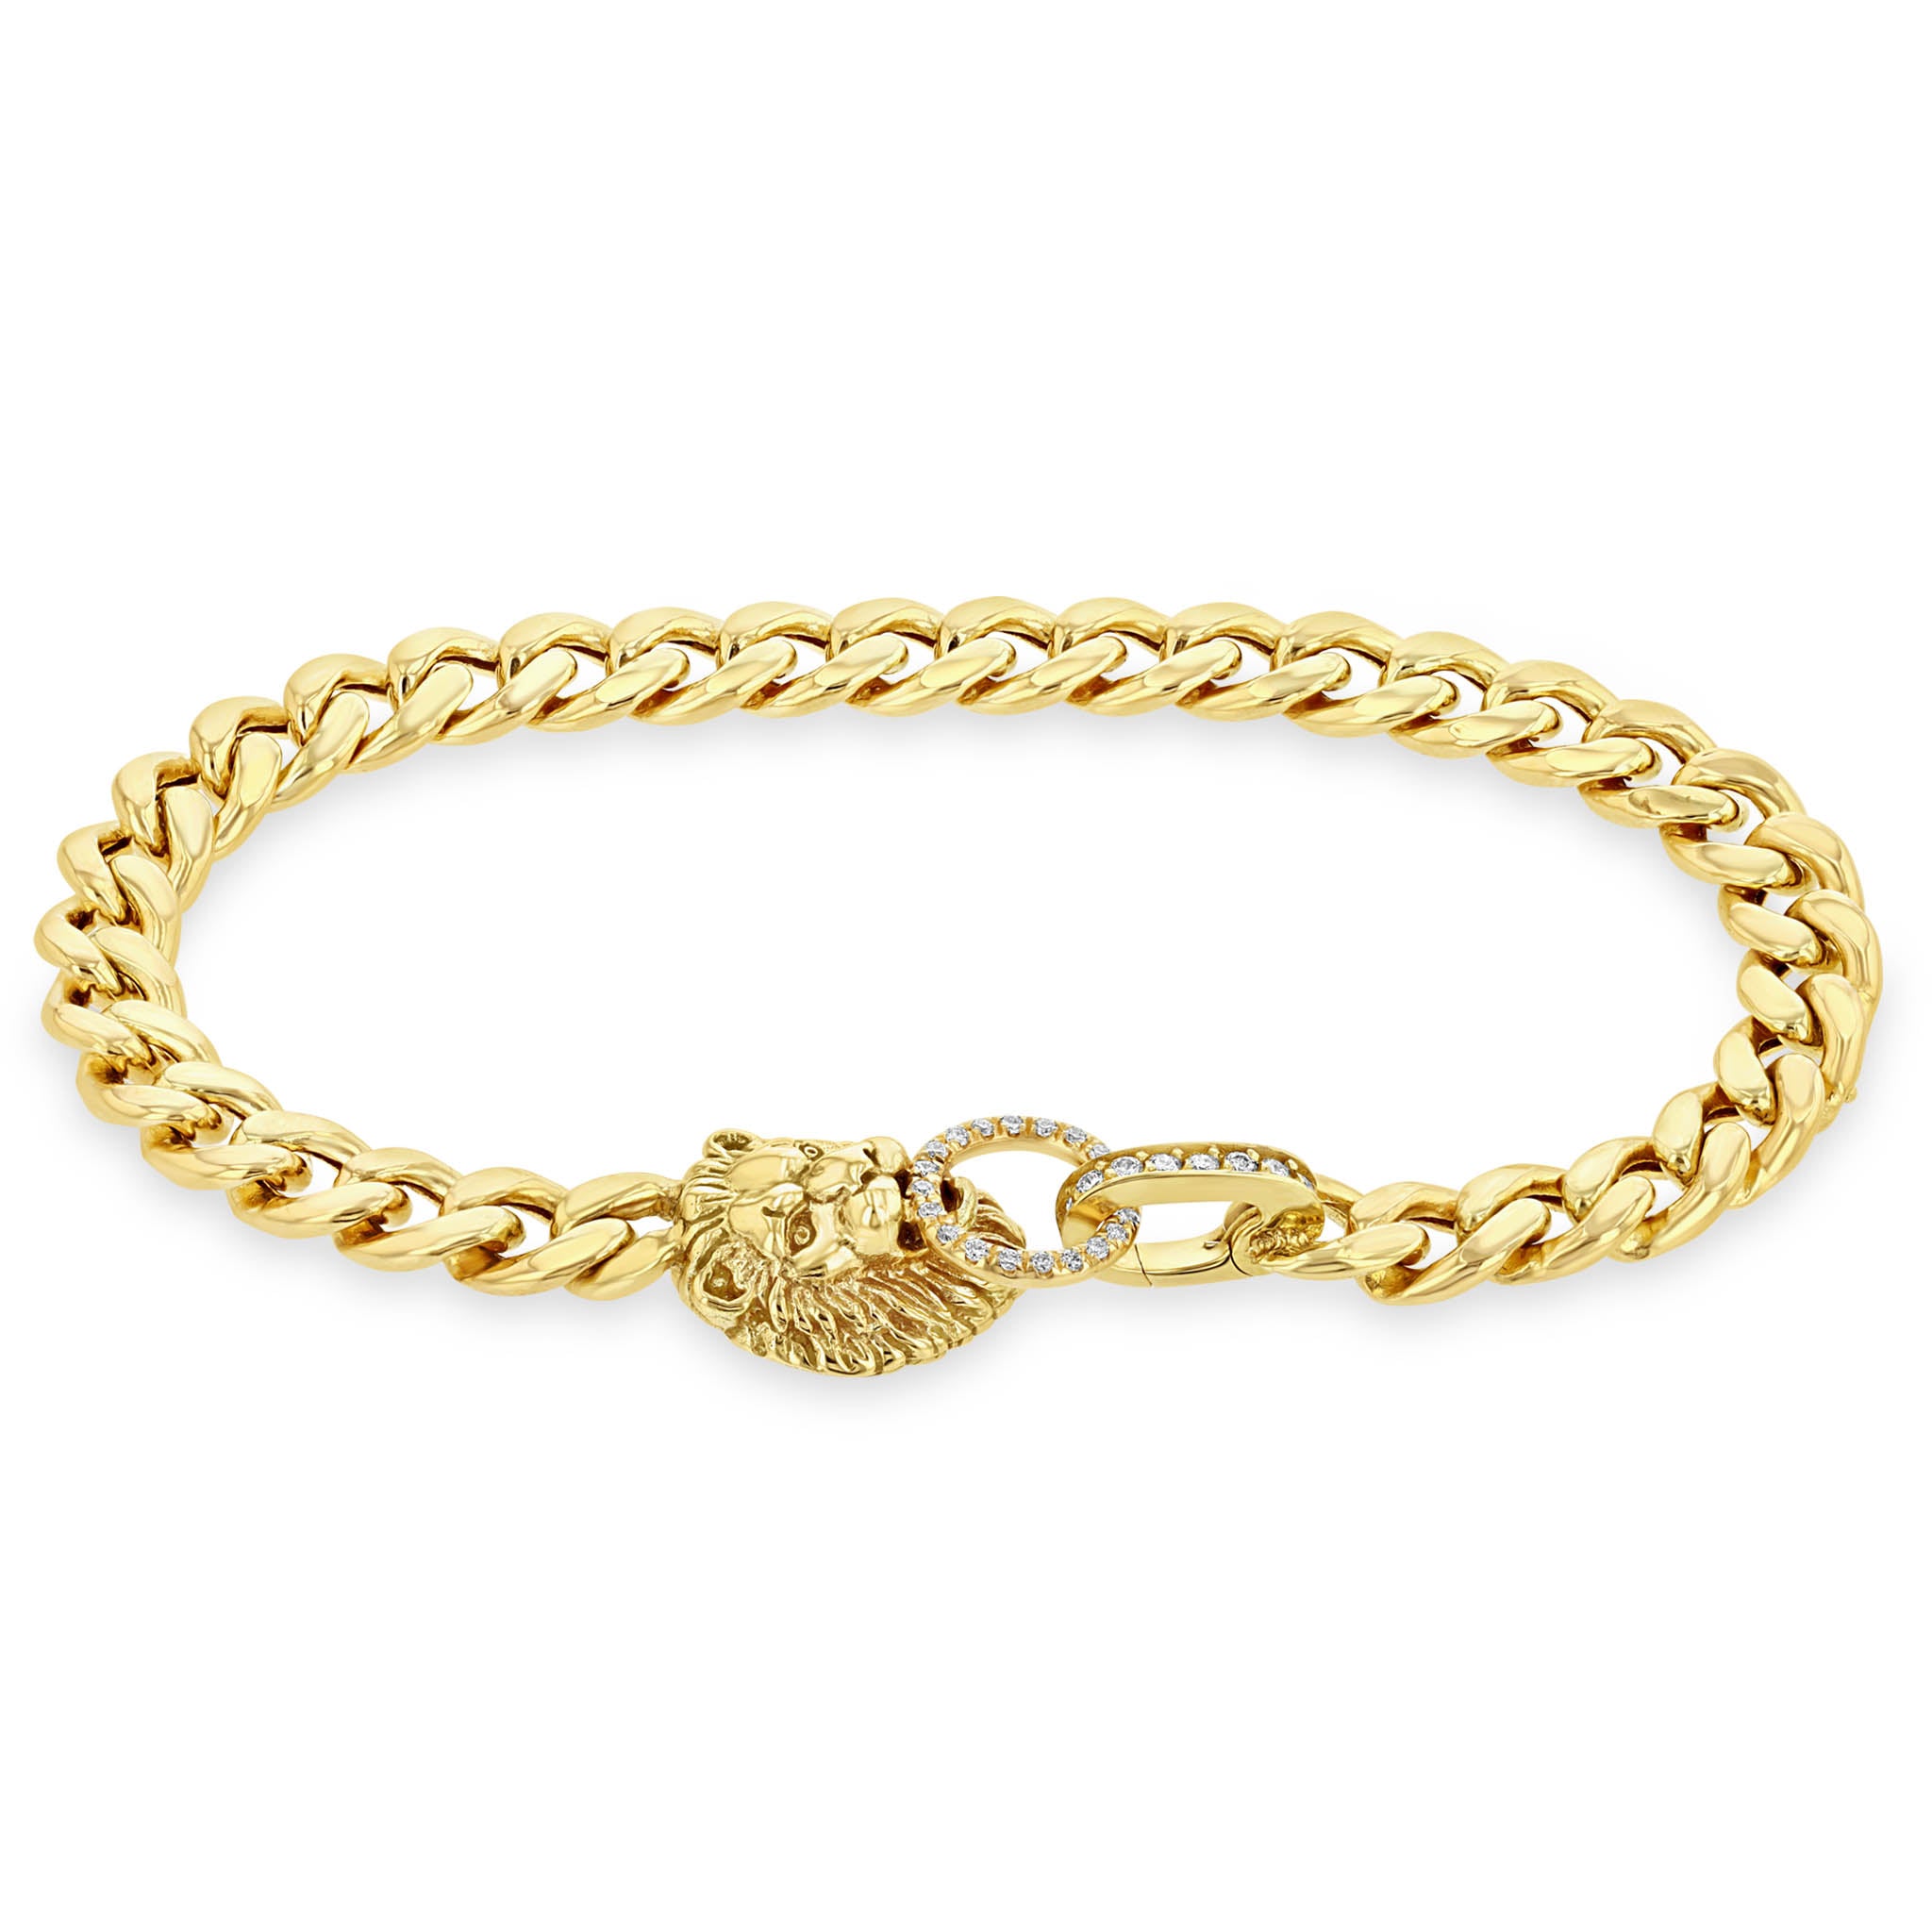 Zoë Chicco 14K Gold Medium Mantra Charm Oval Link Chain Hook Bracelet 14K Yellow Gold / 7 / Be A Force for Good w/Heart Border